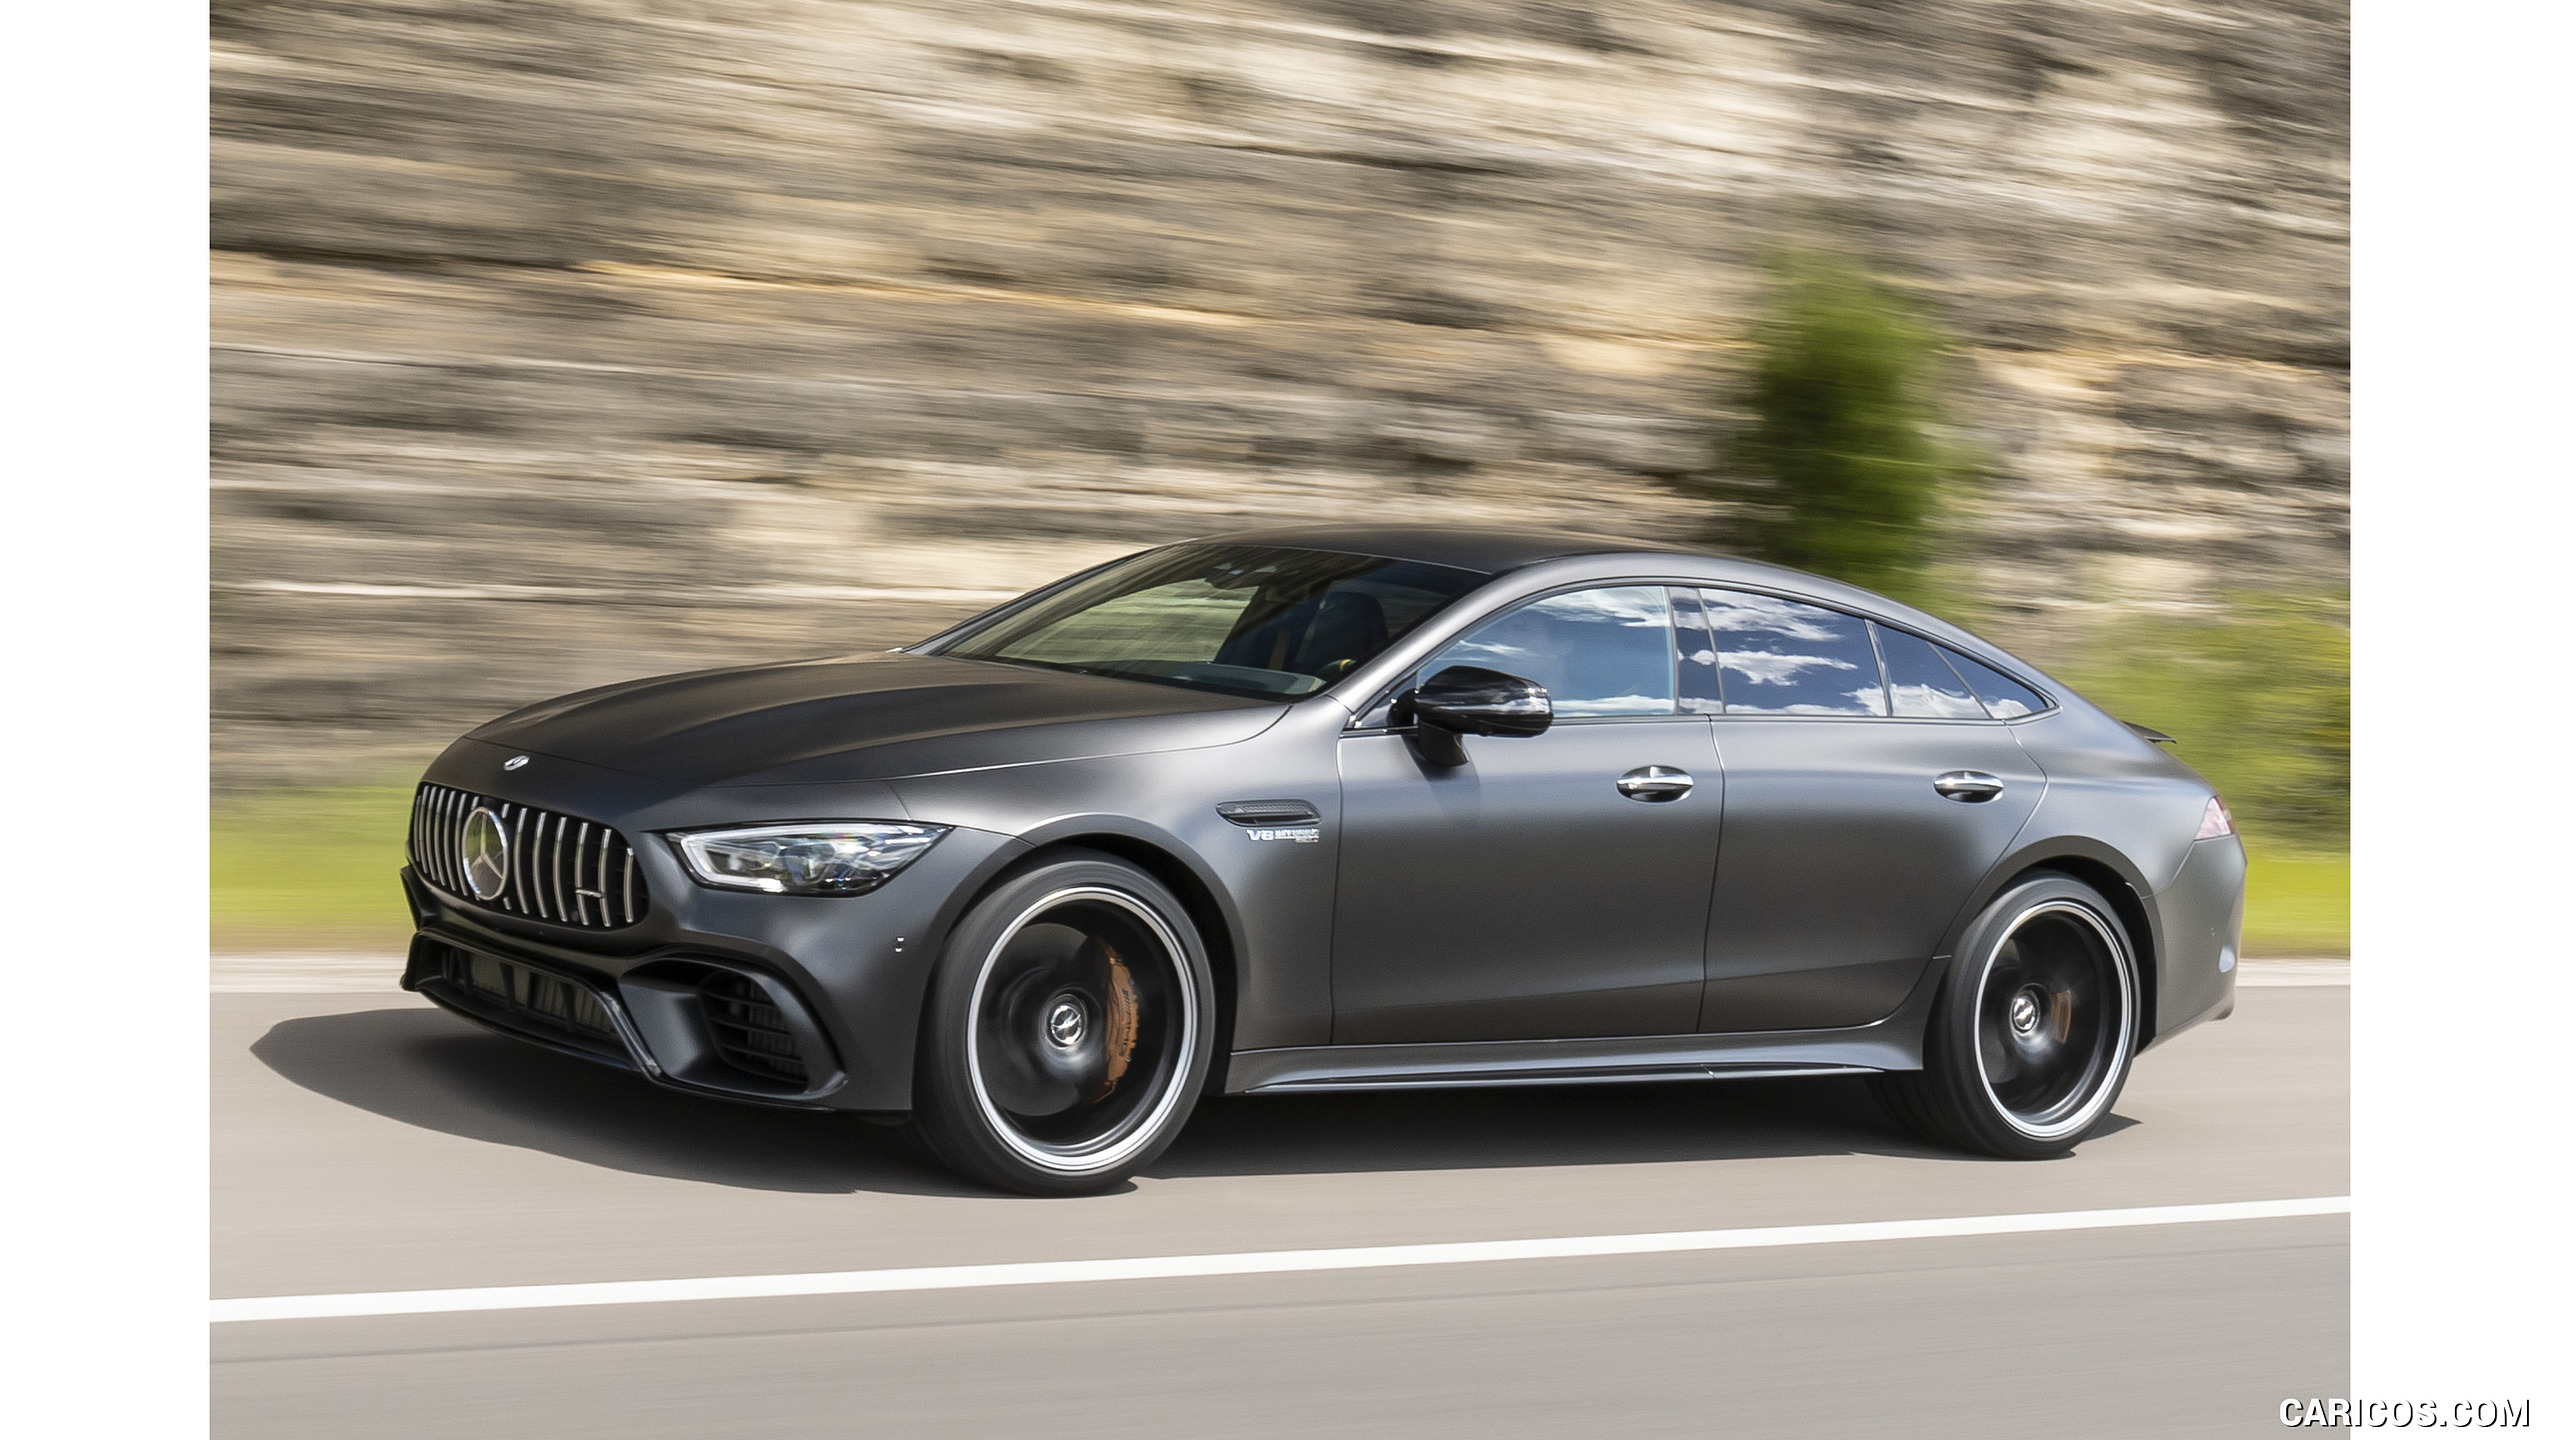 2019 Mercedes-AMG GT 63 S 4MATIC+ 4-Door Coupe - Front Three-Quarter, #192 of 427